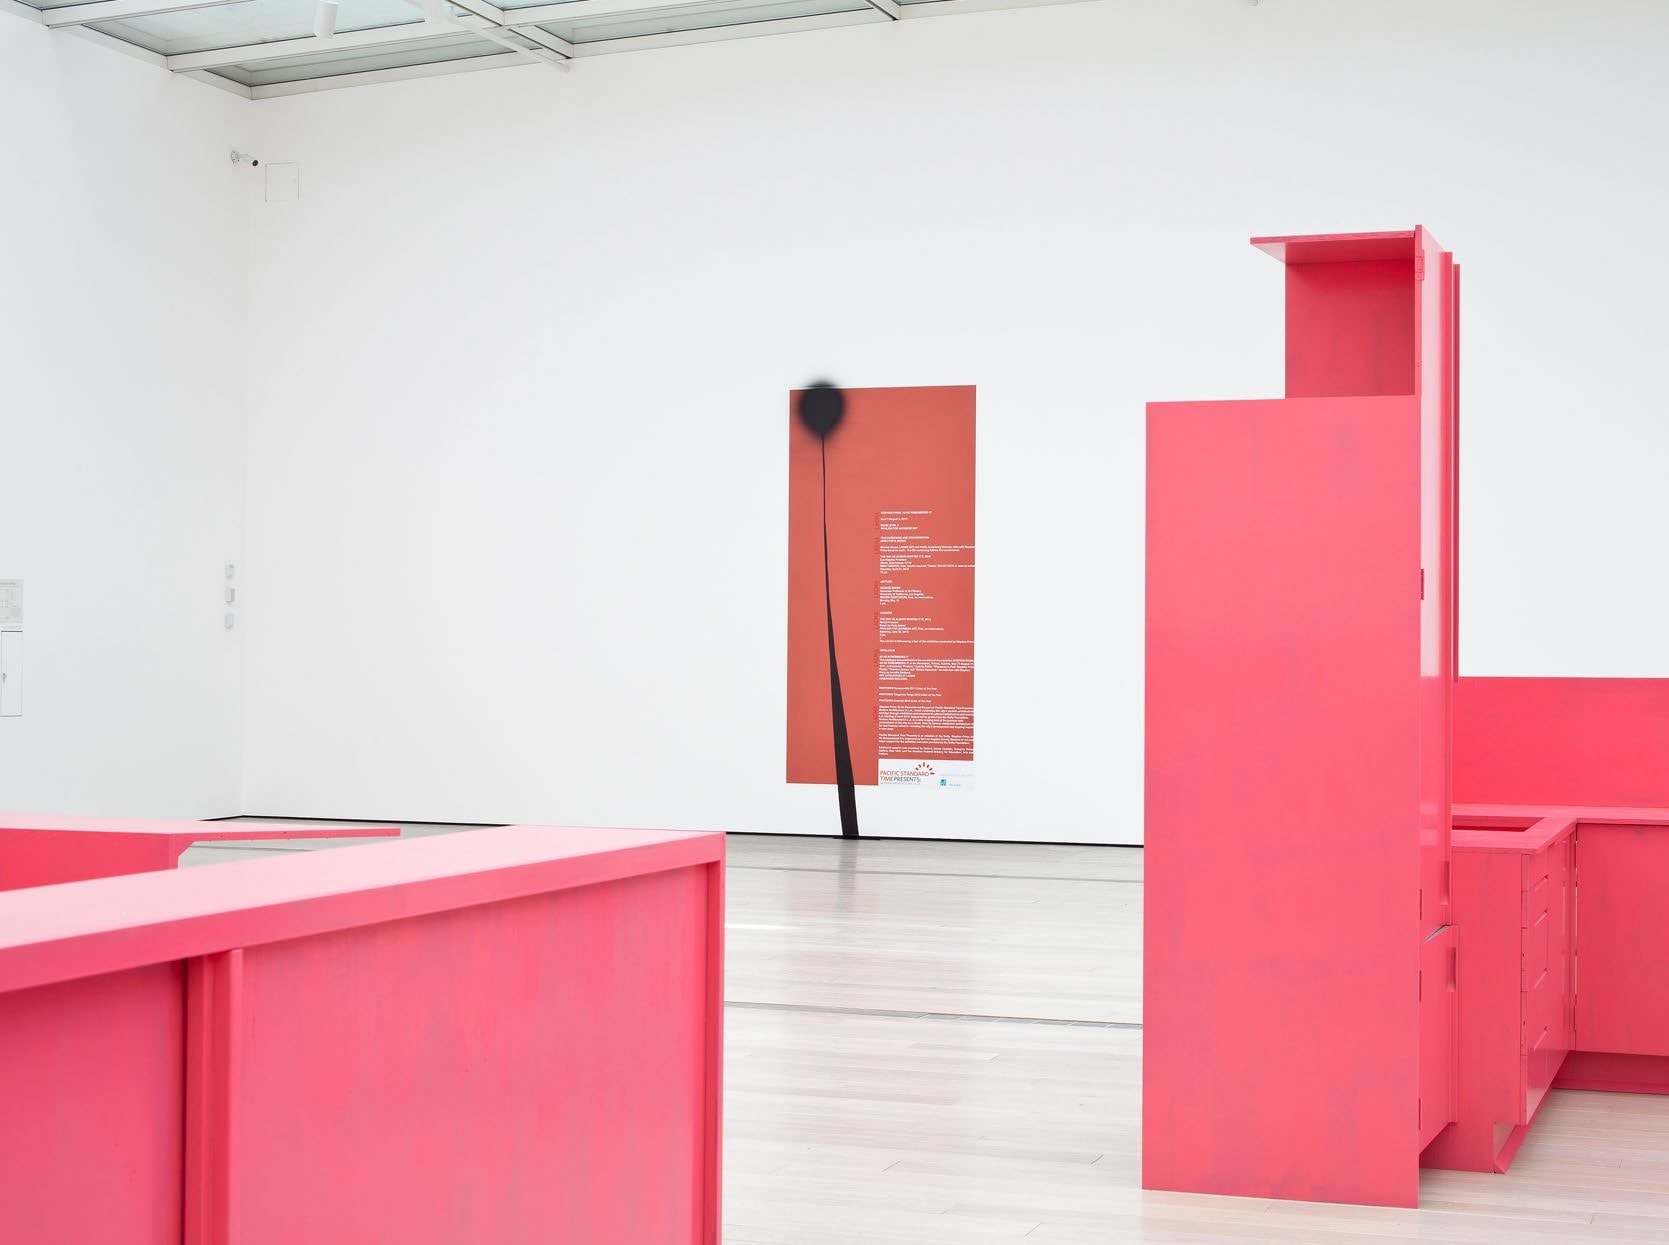 Installation view, As He Remembered It, Los Angeles County Museum of Art, Los Angeles, 2013